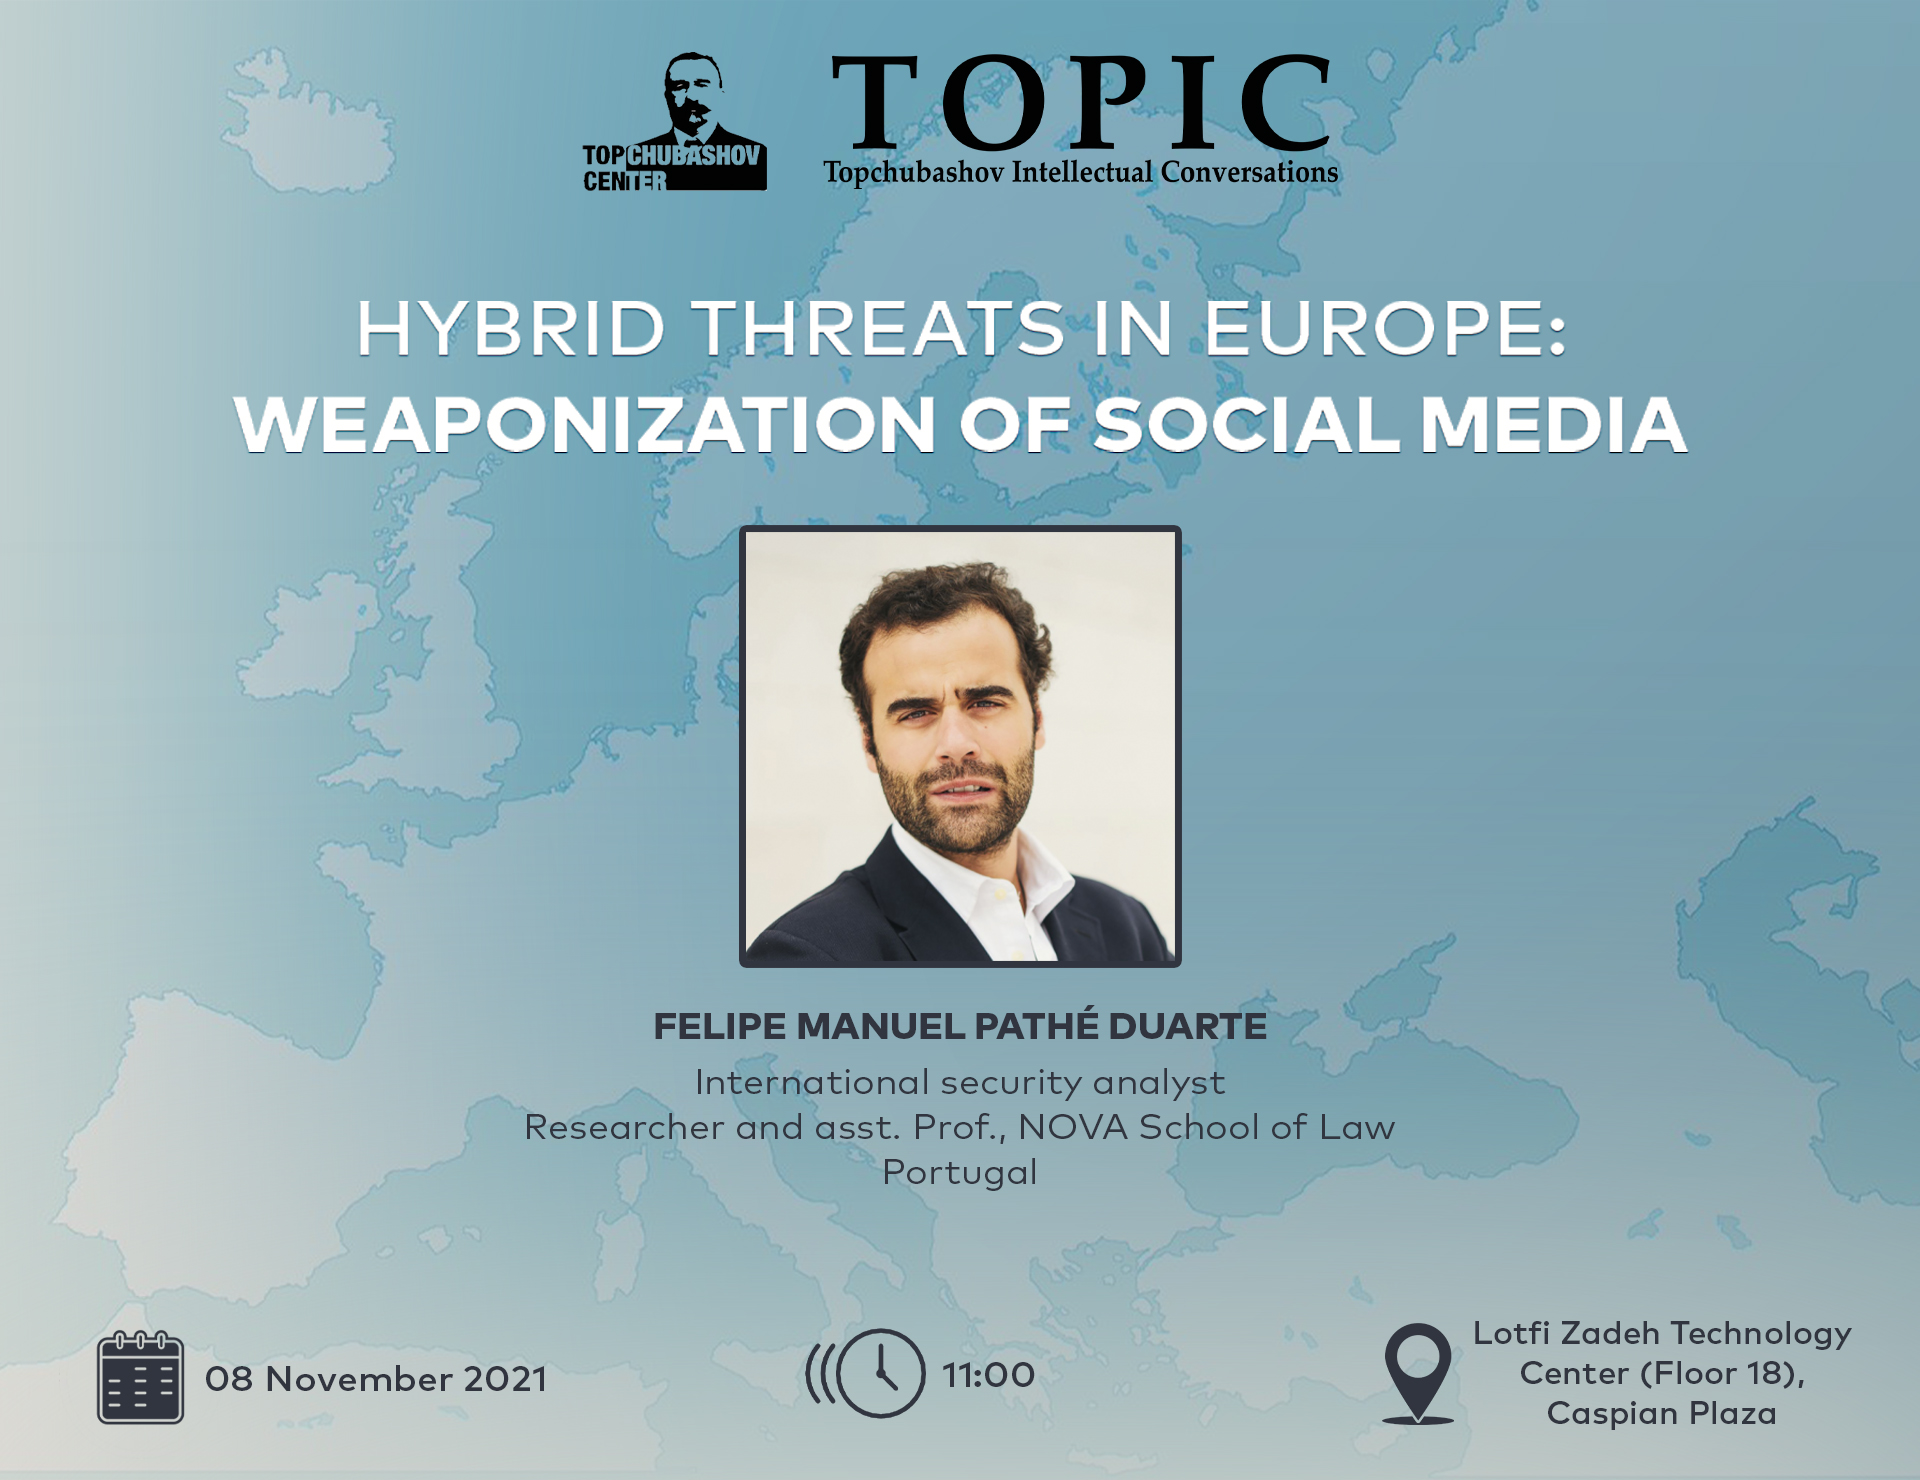 Hybrid threats in Europe: Weaponization of Social Media (Invitation to public lecture)